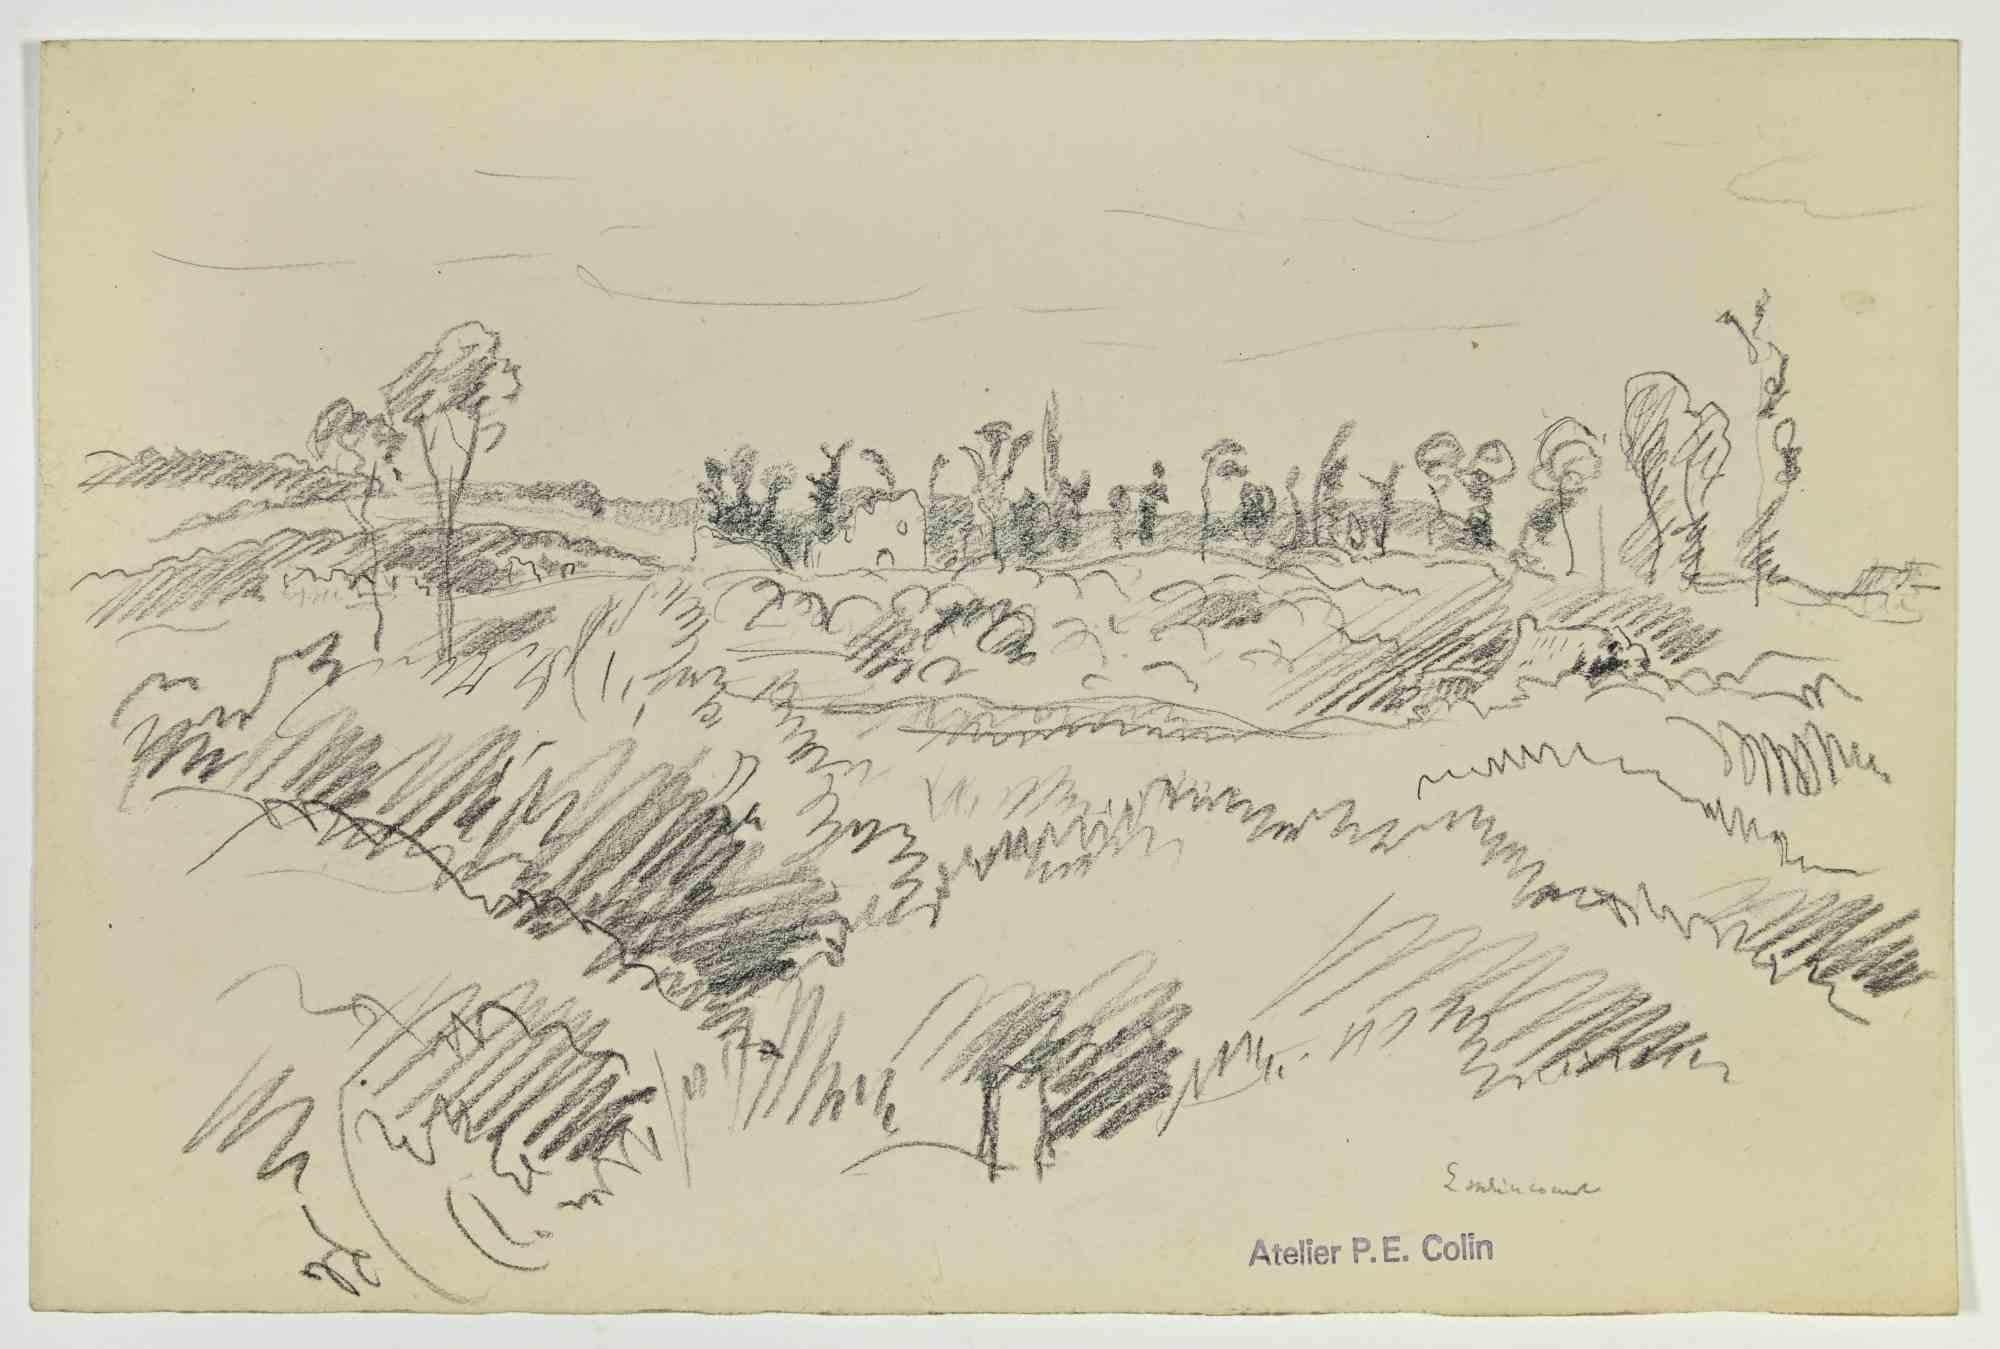 Landscape is a drawing realized by Paul Emile Colin in the Early 20th Century.

Carbon Pencil on ivory-colored paper

Stamped on the lower.

Good conditions with slight foxing.

The artwork is realized through deft expressive strokes.